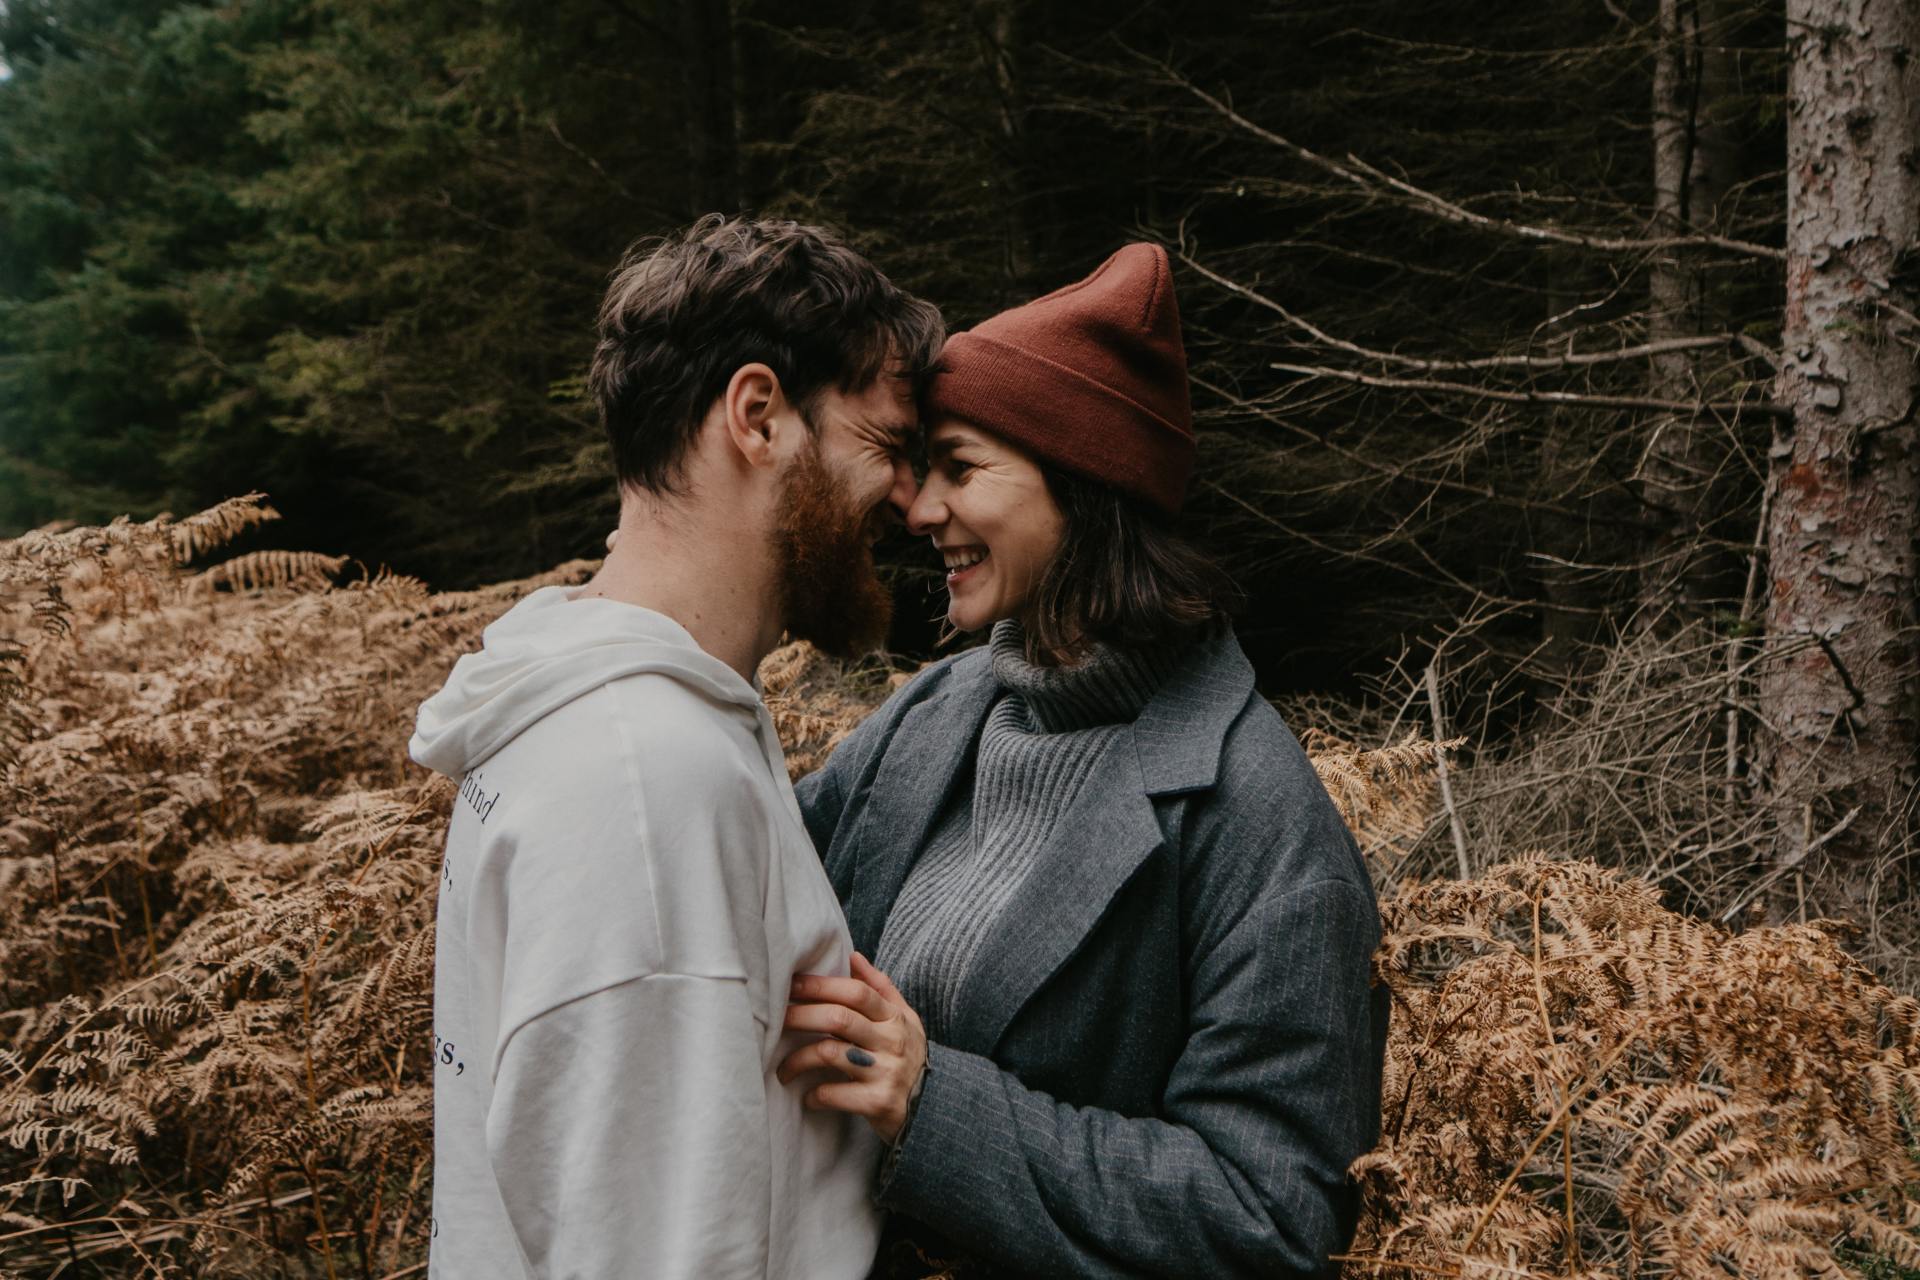 30 Ways Women Can Make Men Feel Loved And Respected 